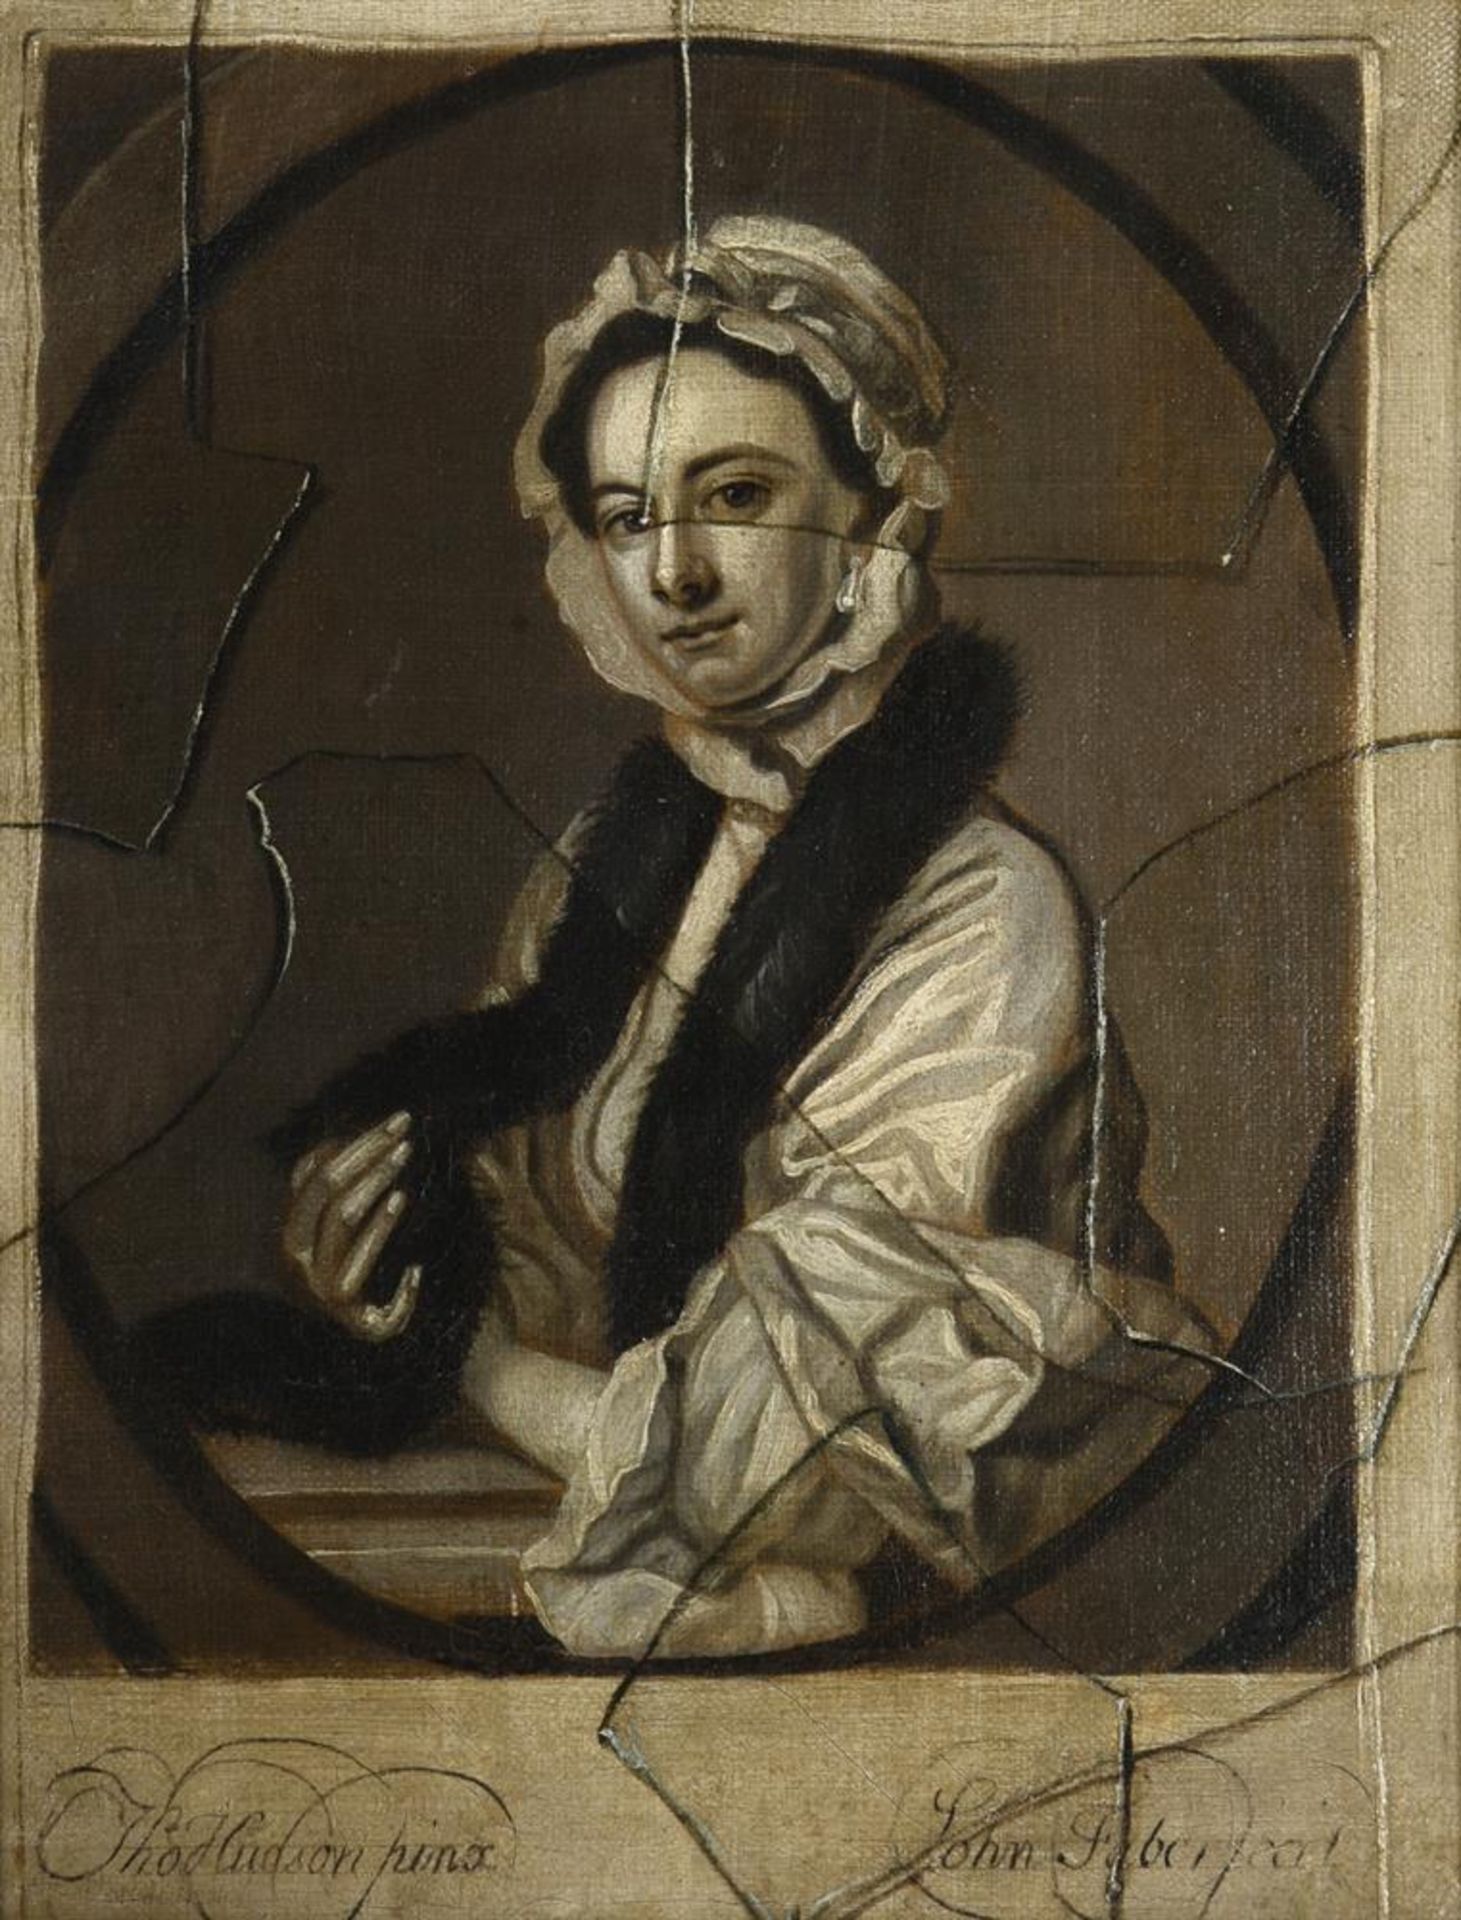 AFTER THOMAS HUDSON, TROMPE L'OEIL WITH A PORTRAIT OF MRS. JOHN FABER - Image 2 of 3